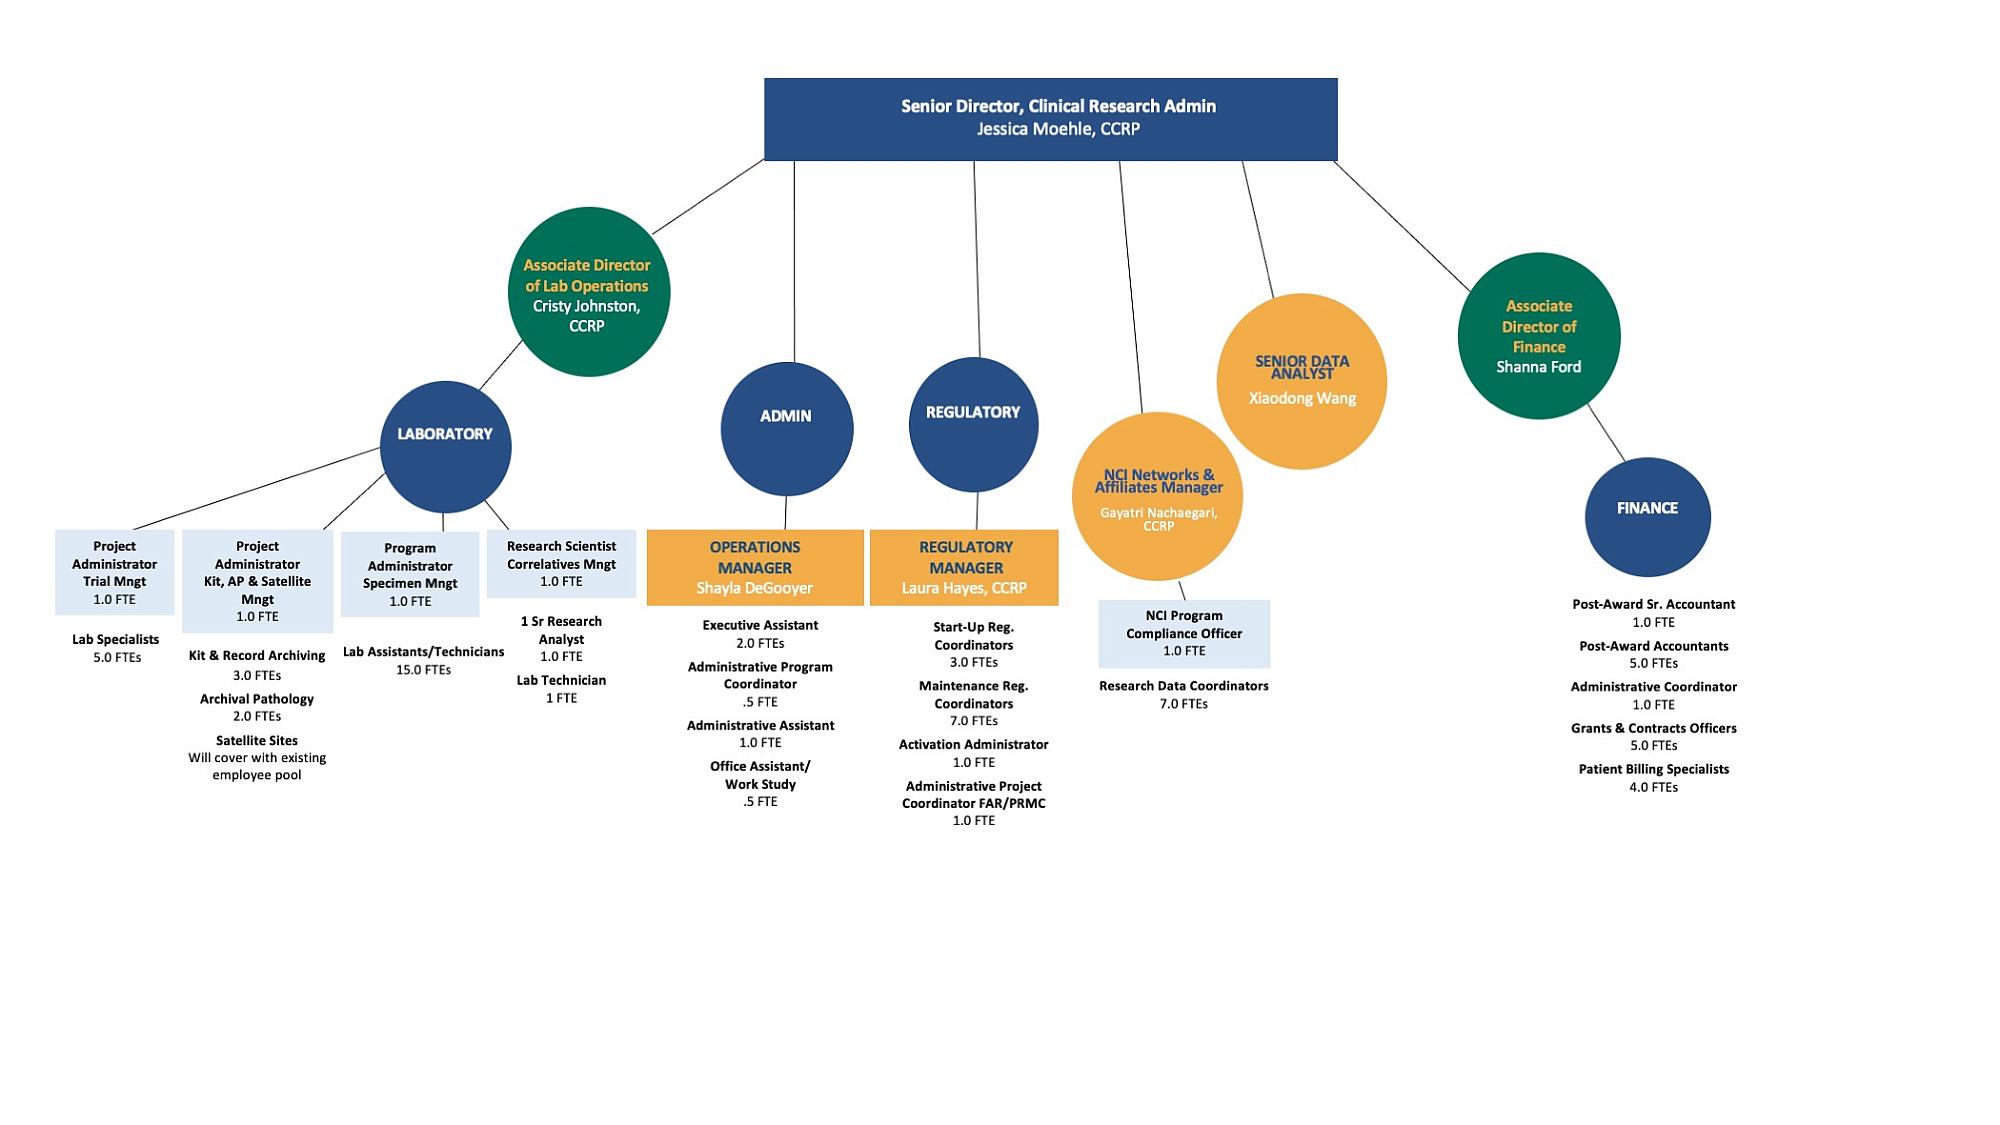 Flowchart of the operations organization of the Clinical Trials Office